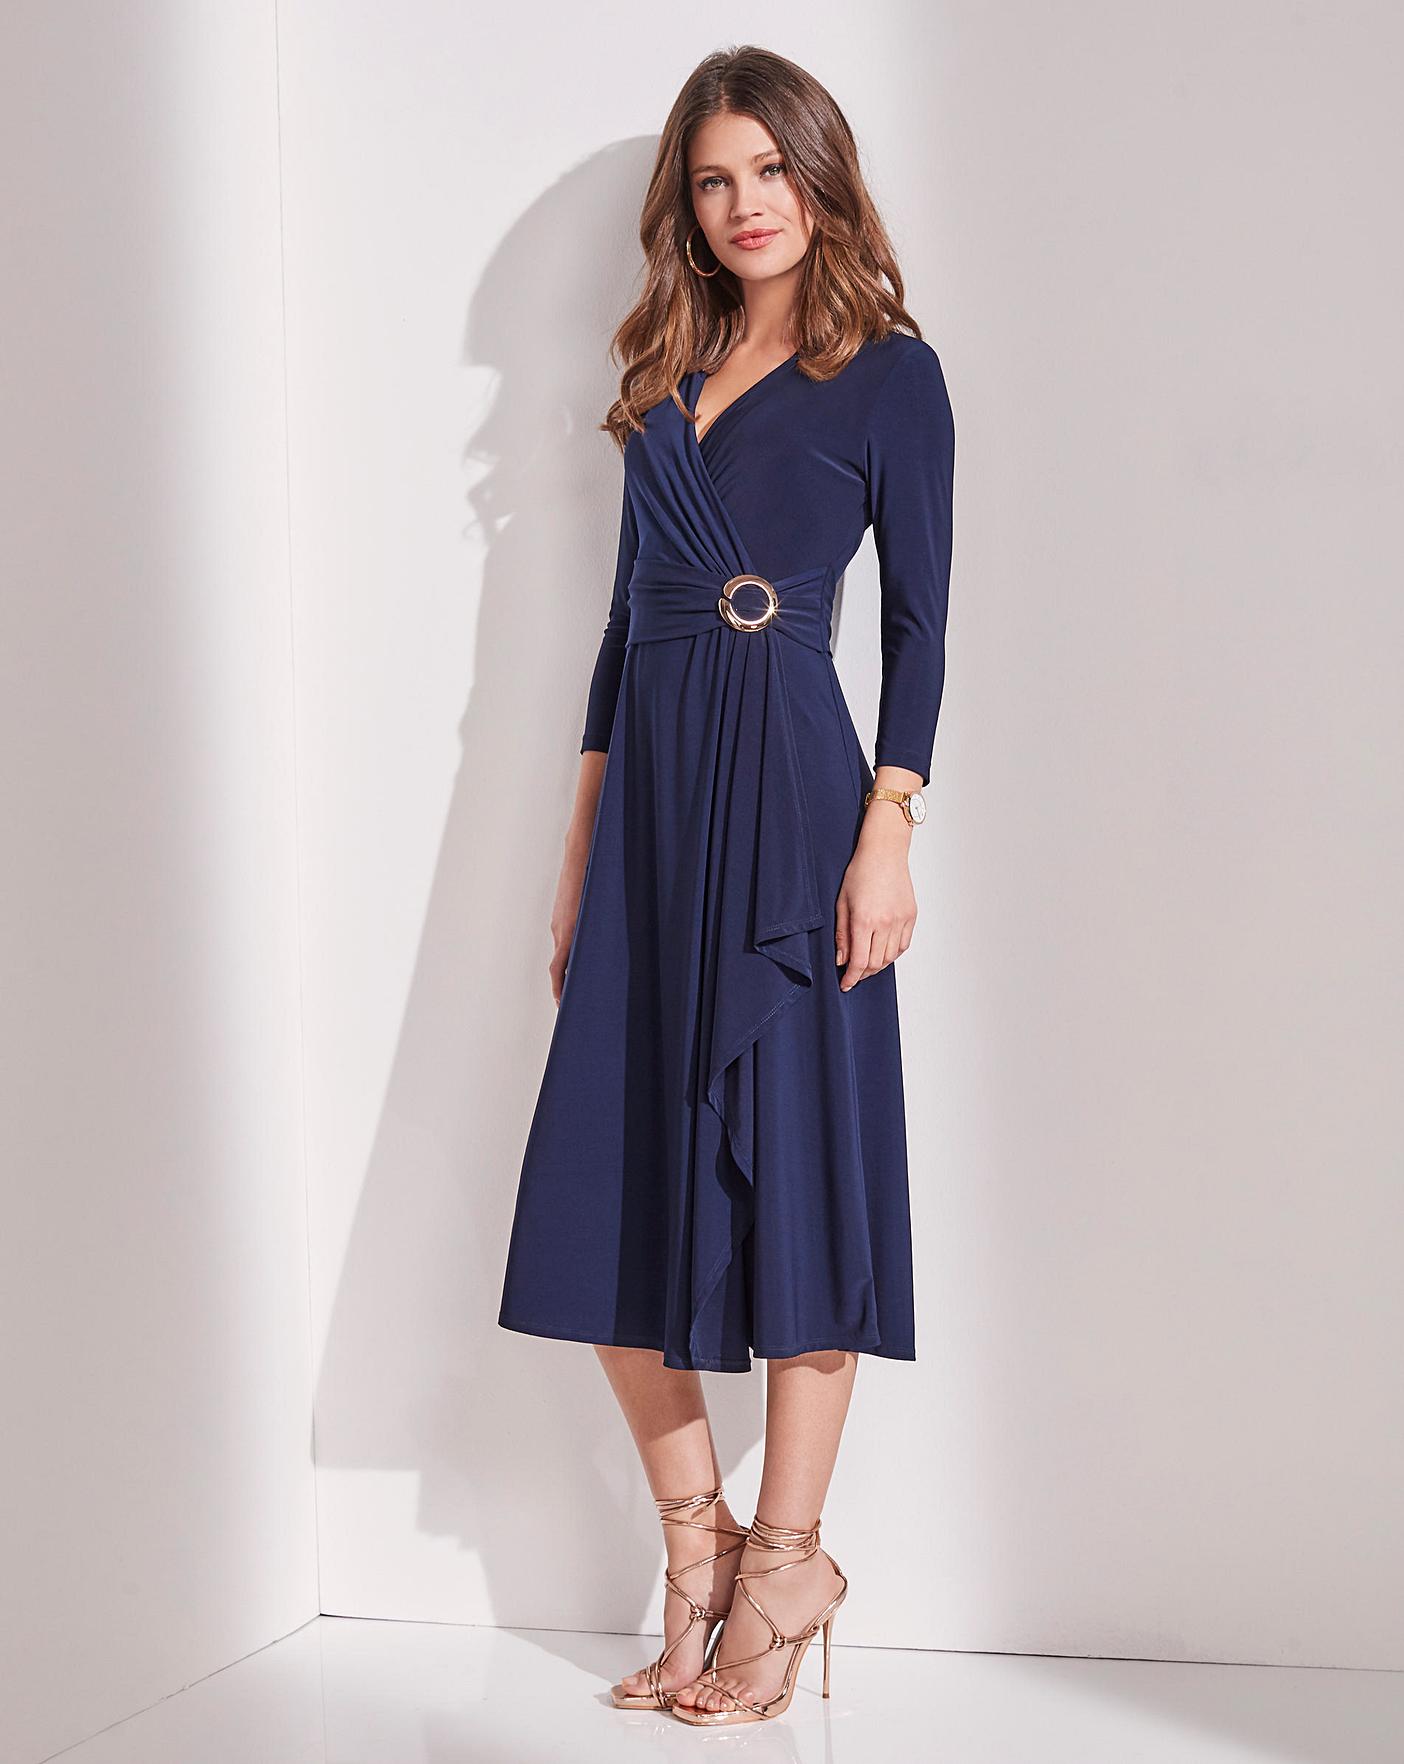 Together Wrap Dress | Oxendales